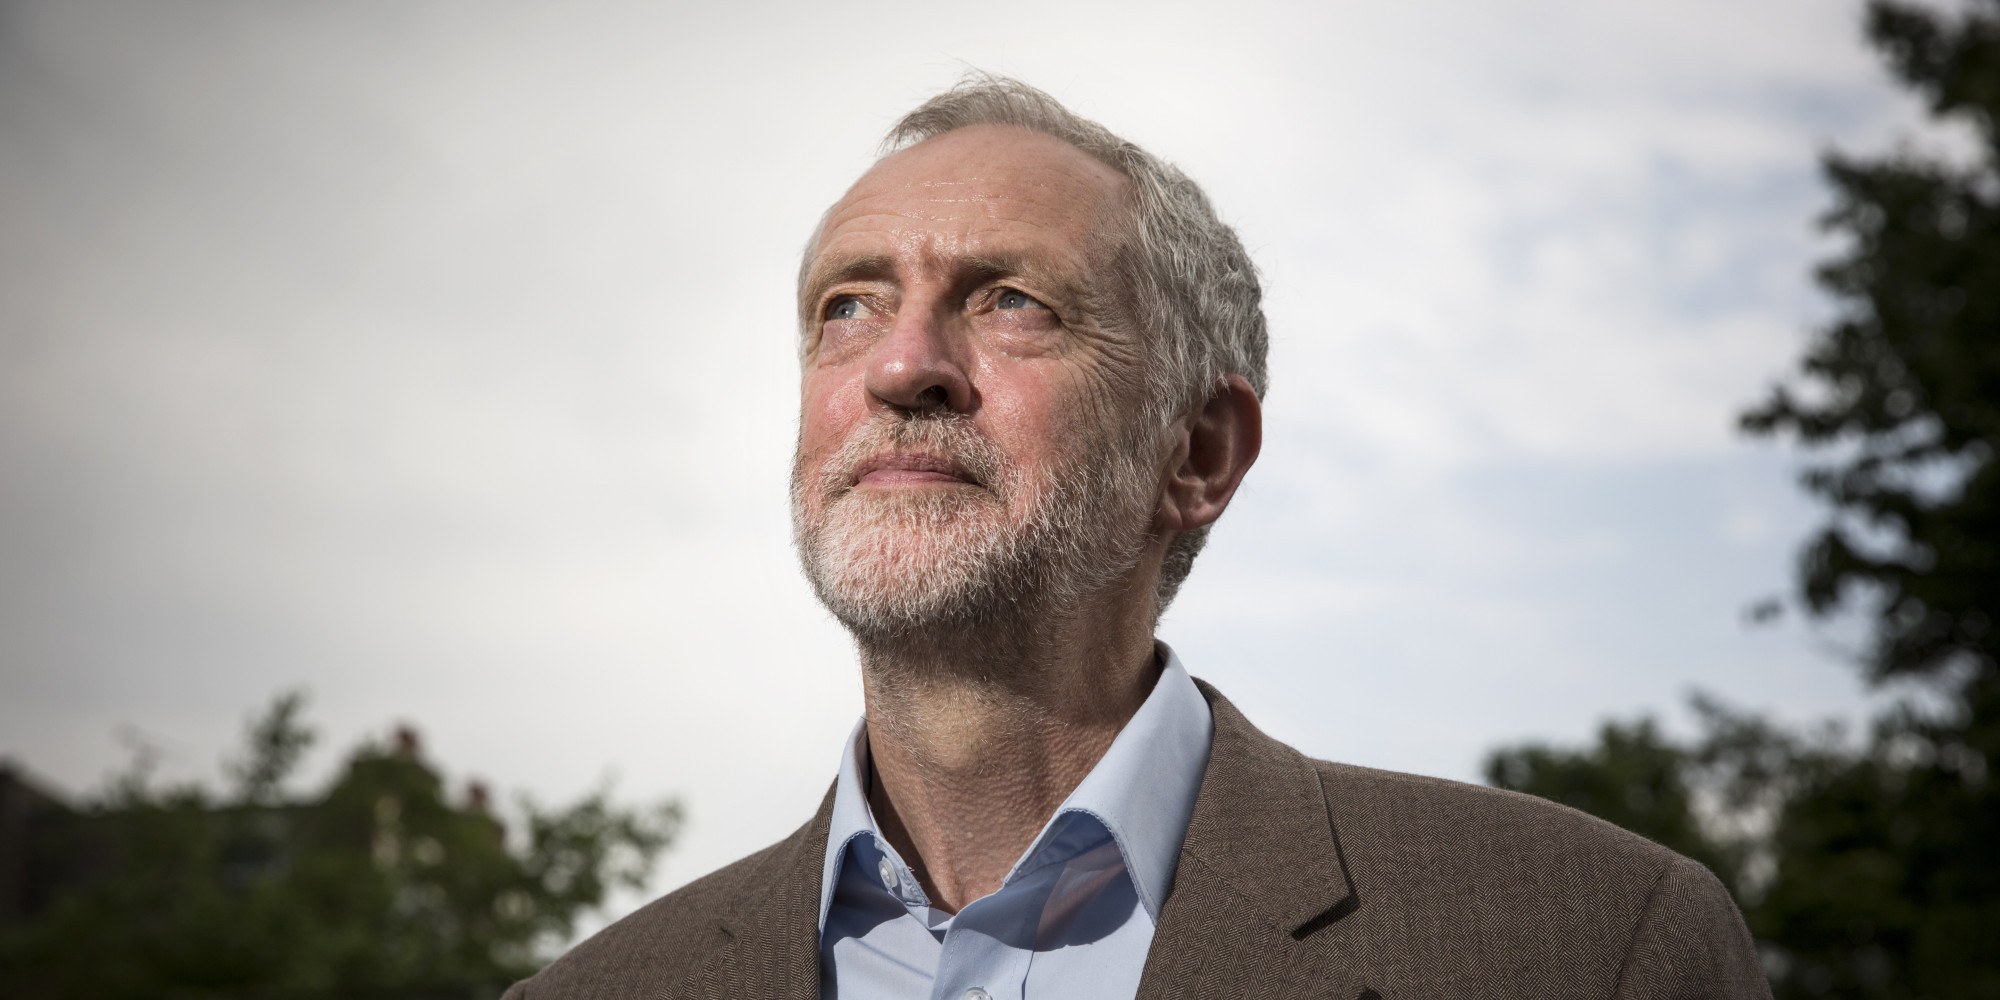 Why We Should Give Labour Leader Jeremy Corbyn A Chance